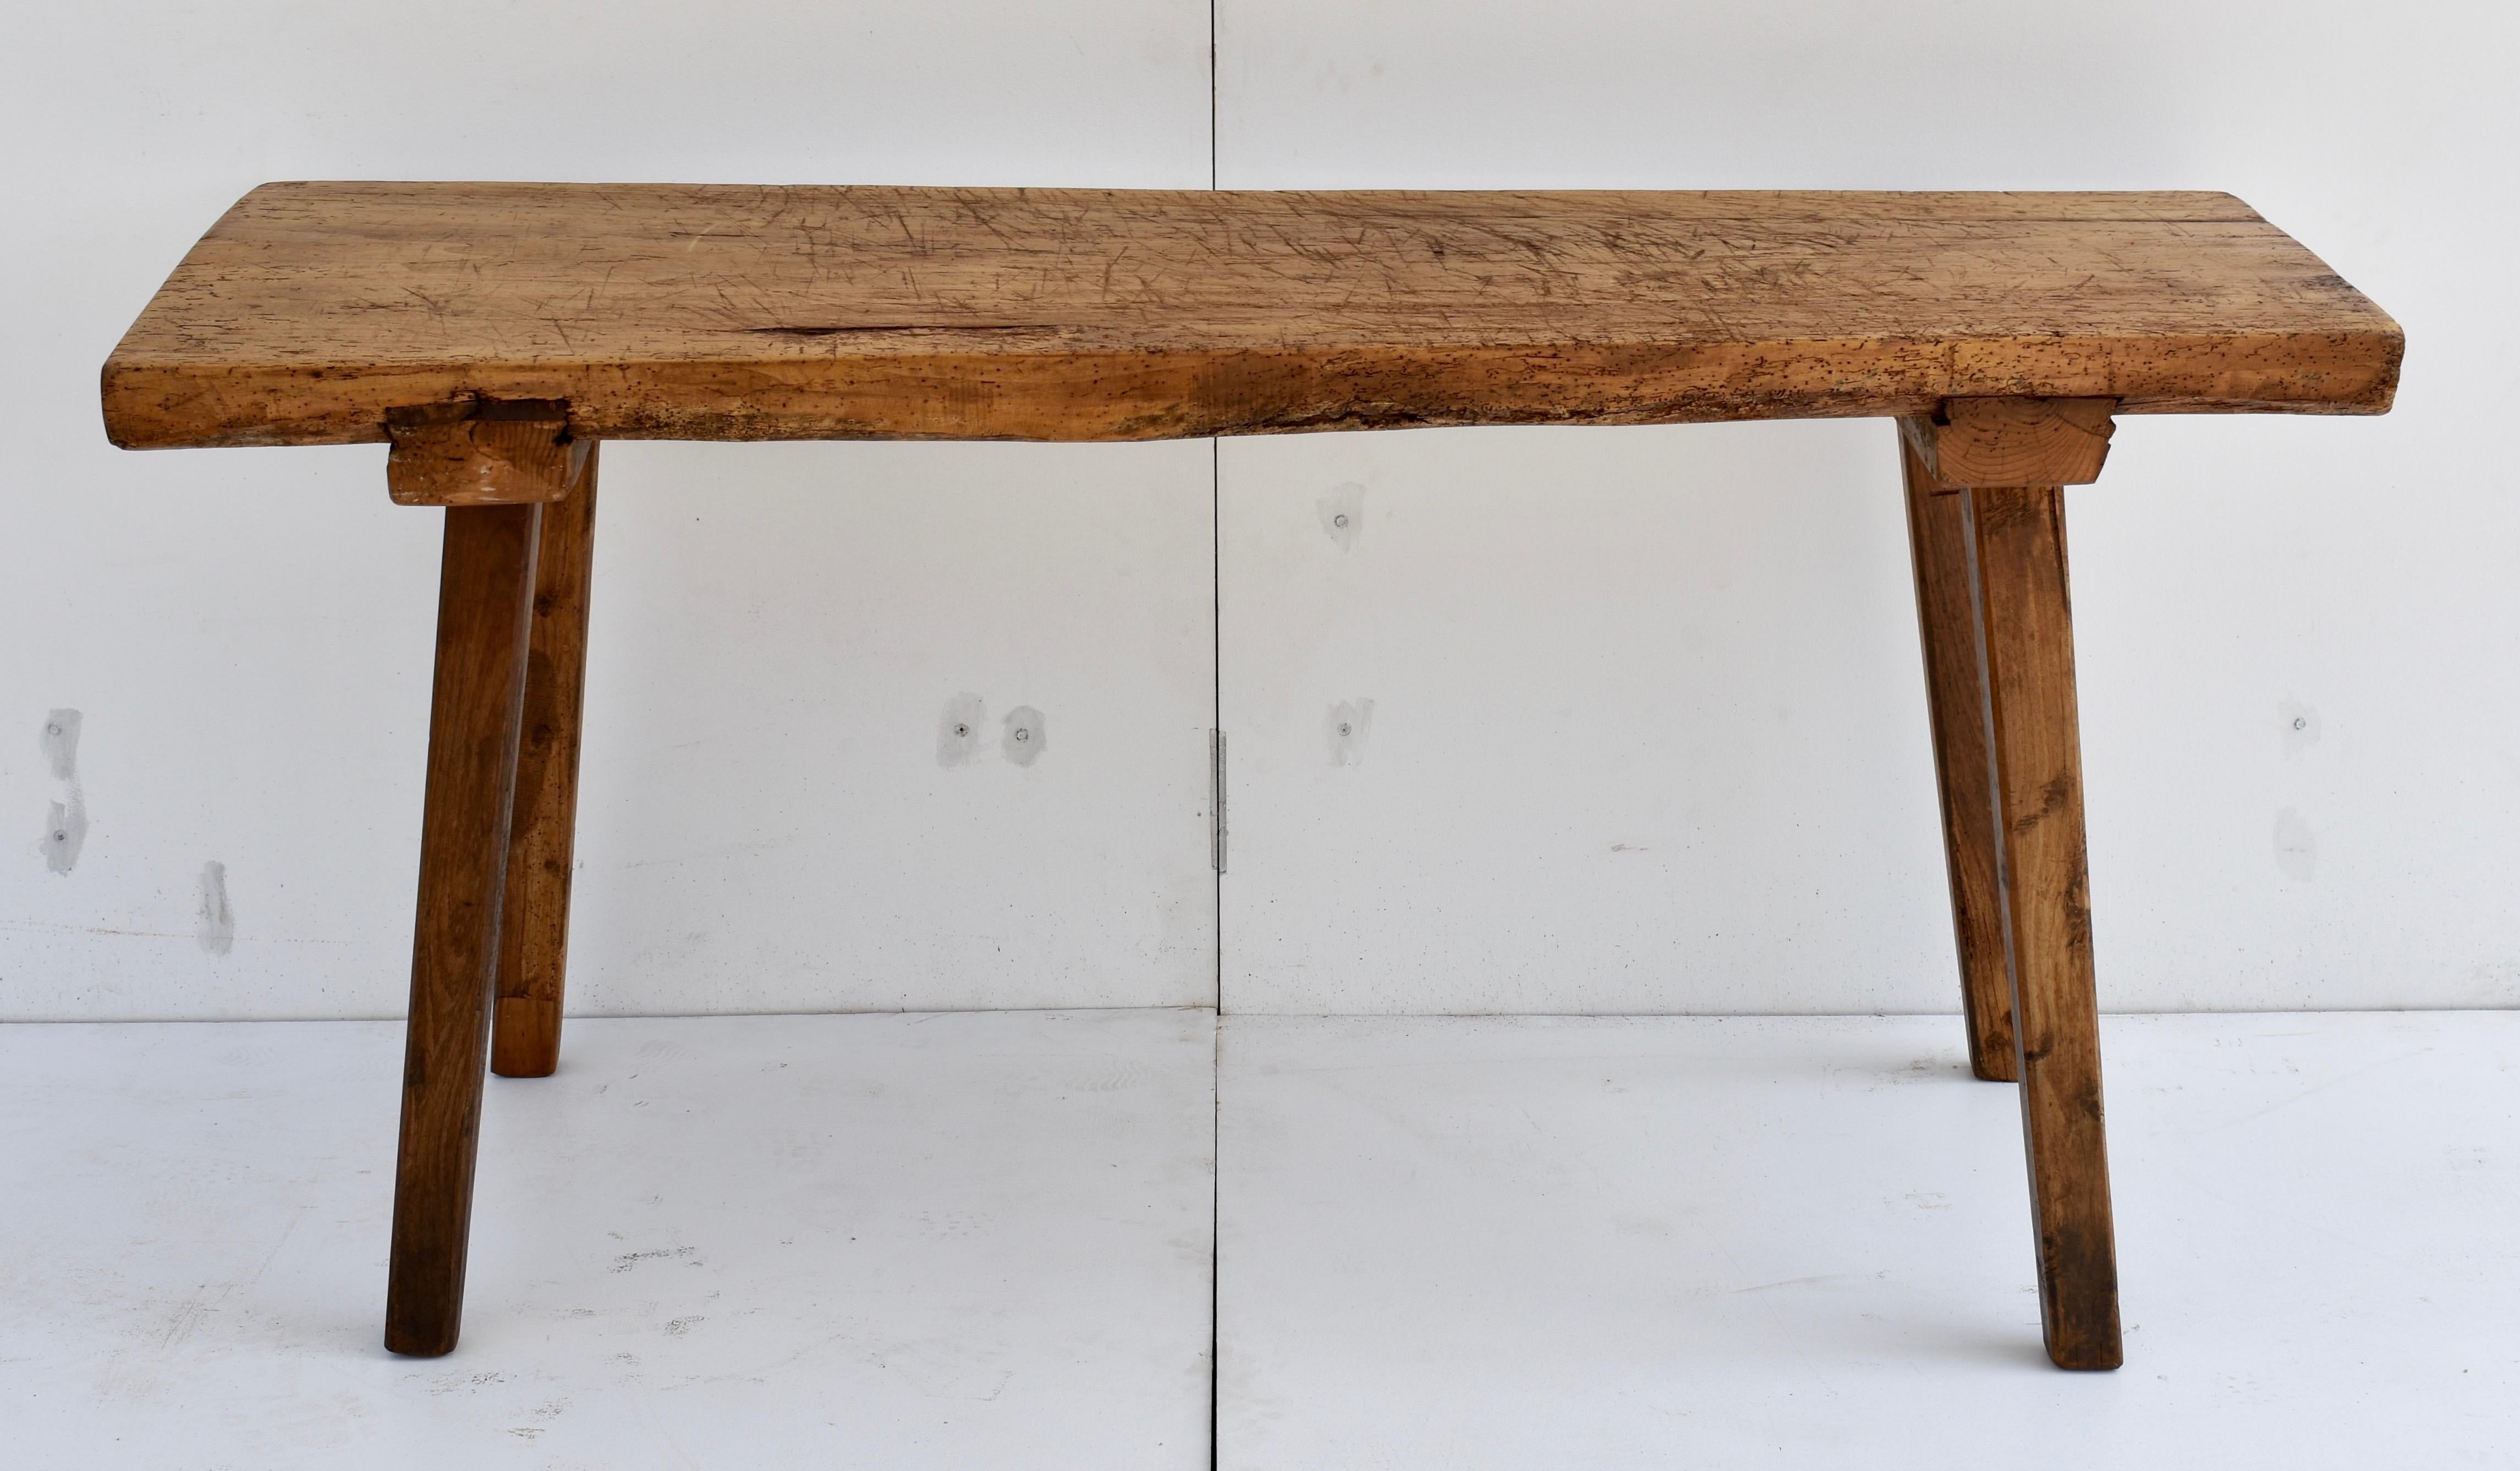 This beautiful oak pig bench has a 2.5”thick single board top nearly two feet wide and over five feet long. The heavy square legs, with a chamfer lower down, are mortised into oak cleats, which are dovetailed into the underside of the top.
The